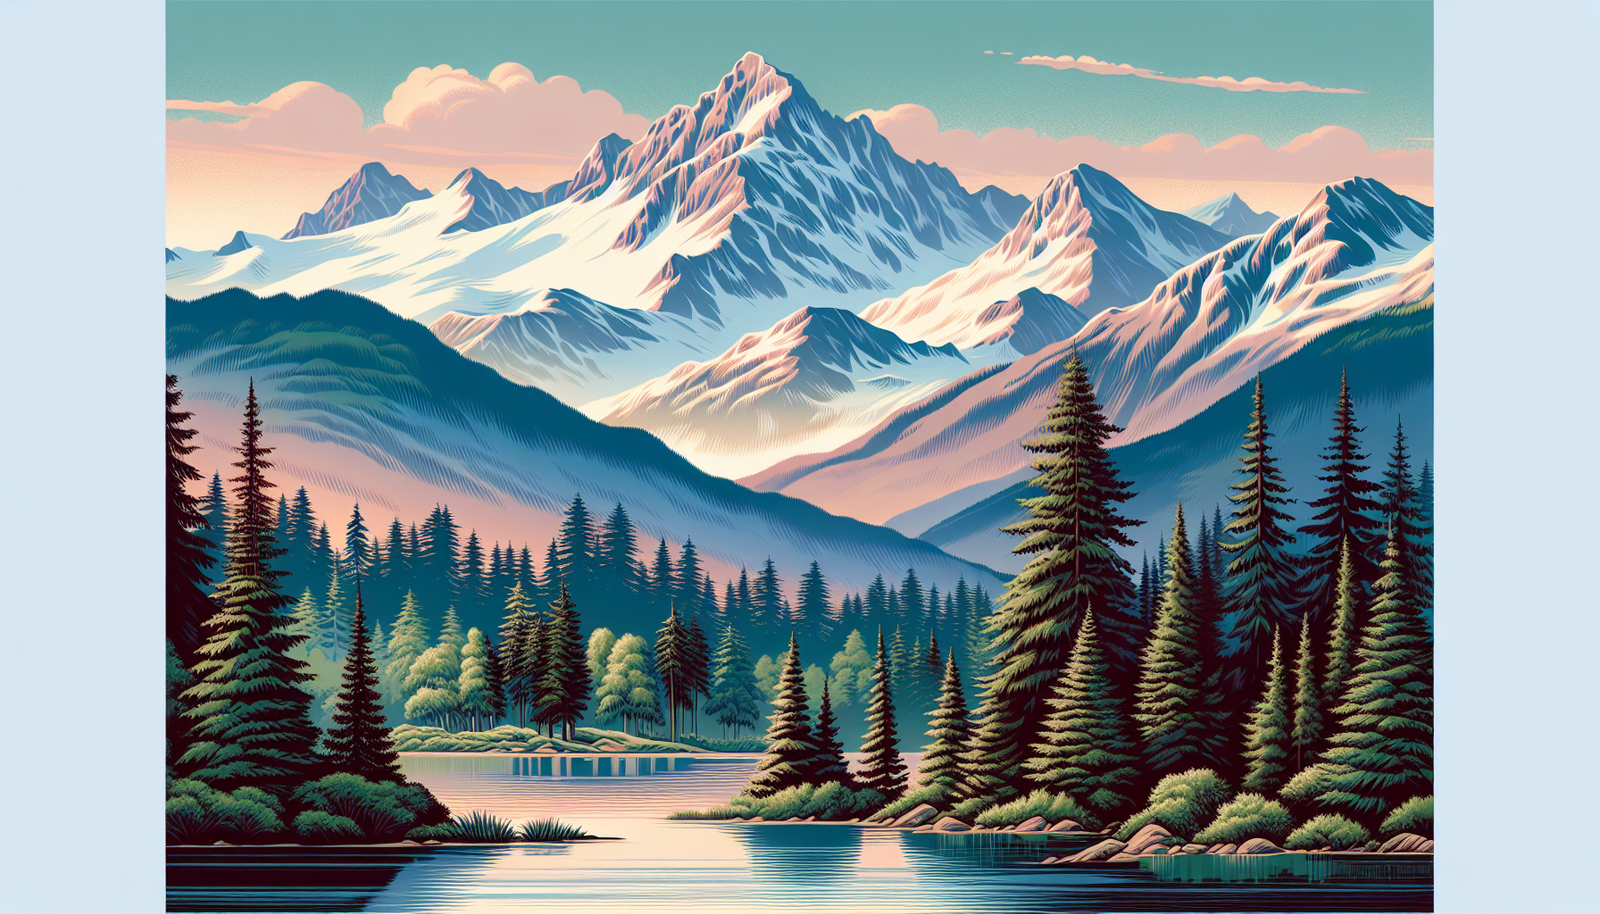 Whistler's serene landscape with mountains and forests in an artistic illustration